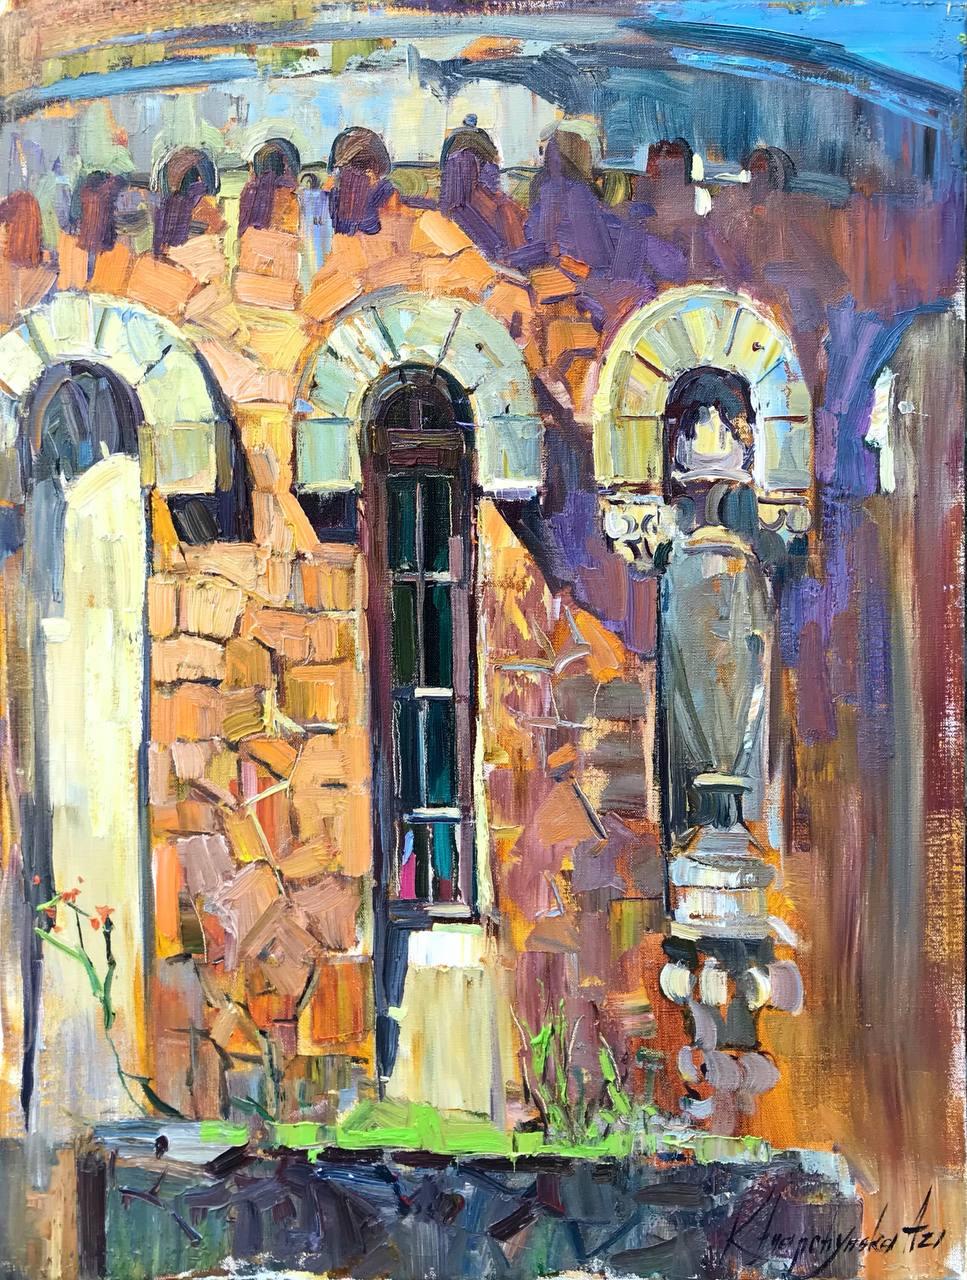  Palace Window - Oil Painting Landscape White Green Blue Yellow Purple Brown 8